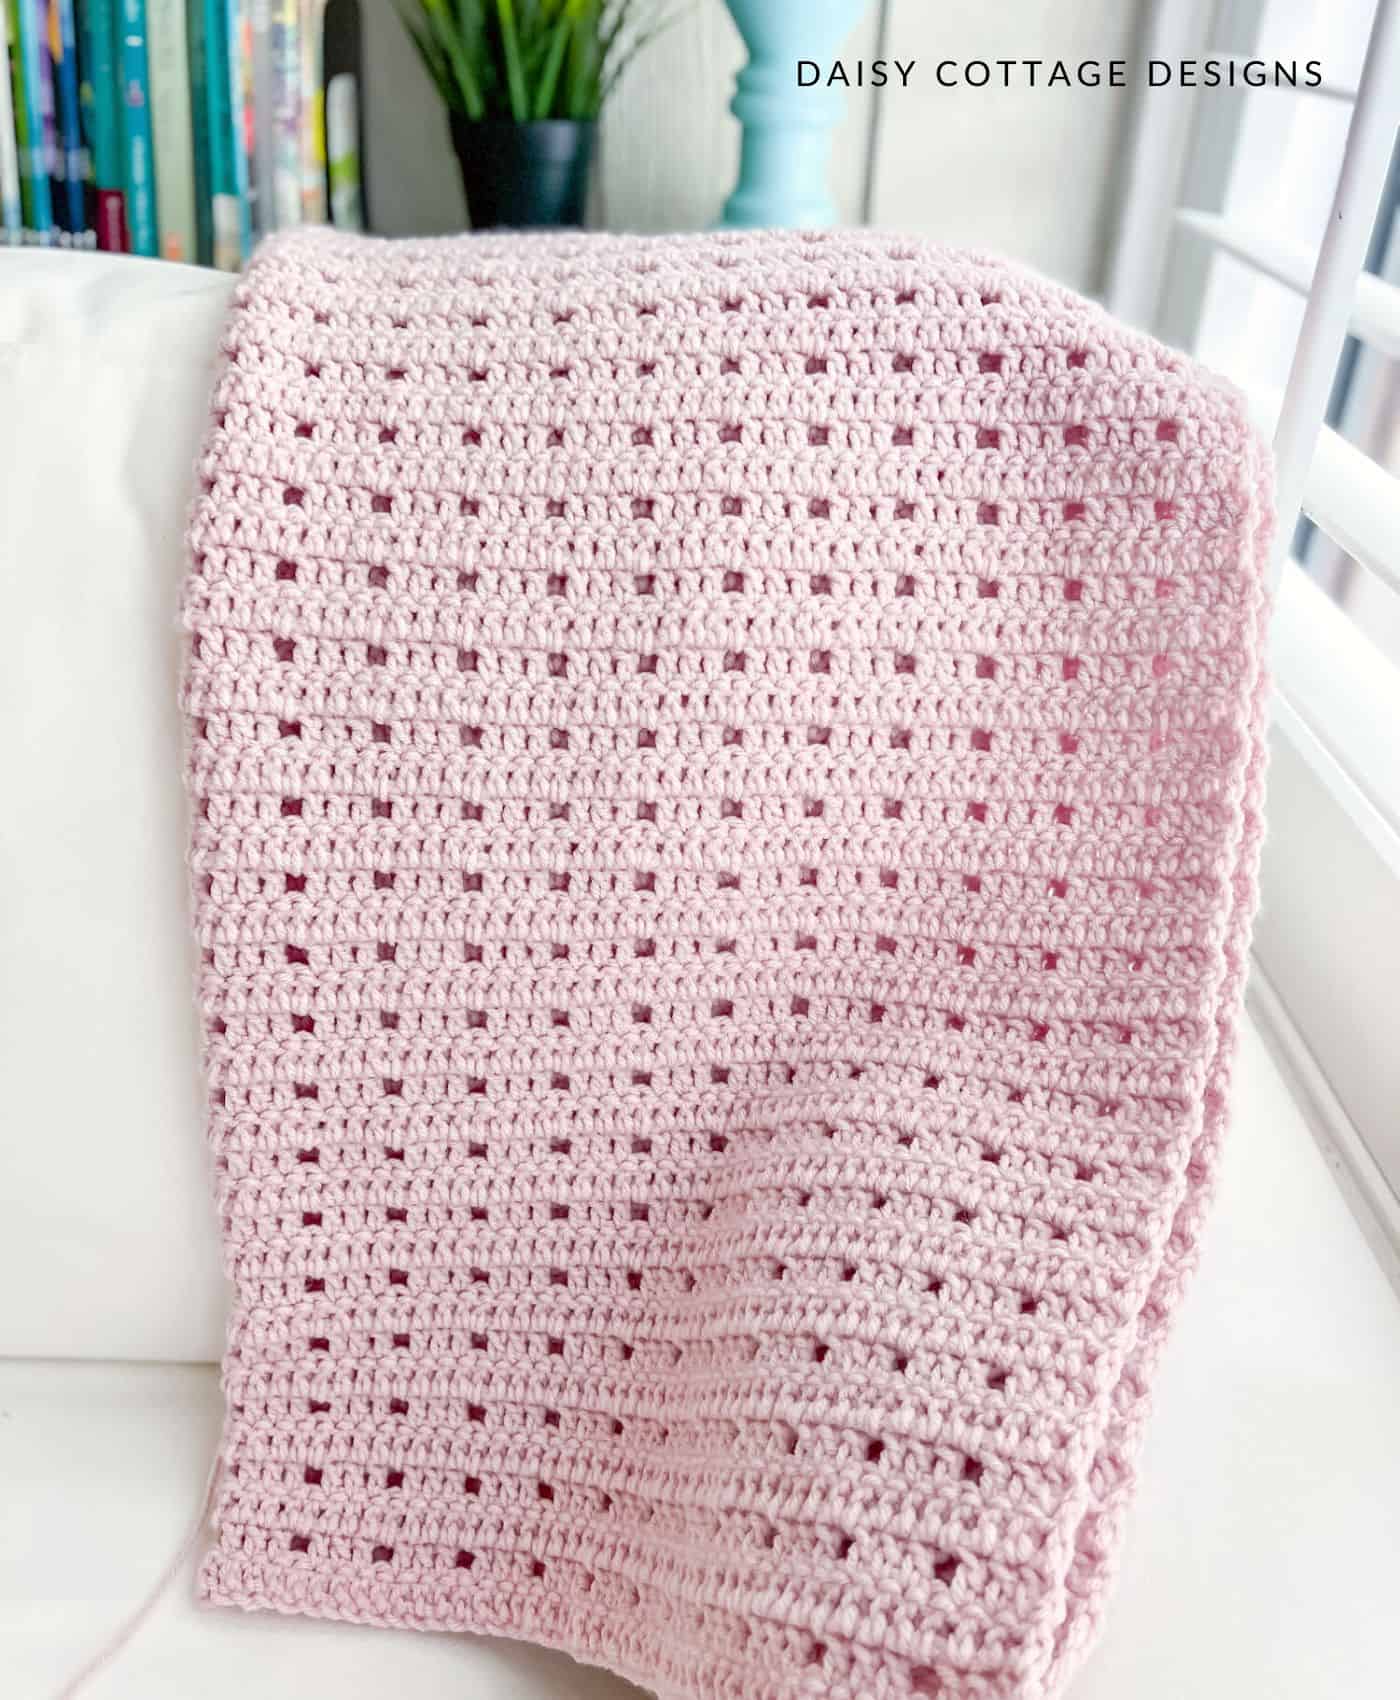 Simple crochet blanket on white couch